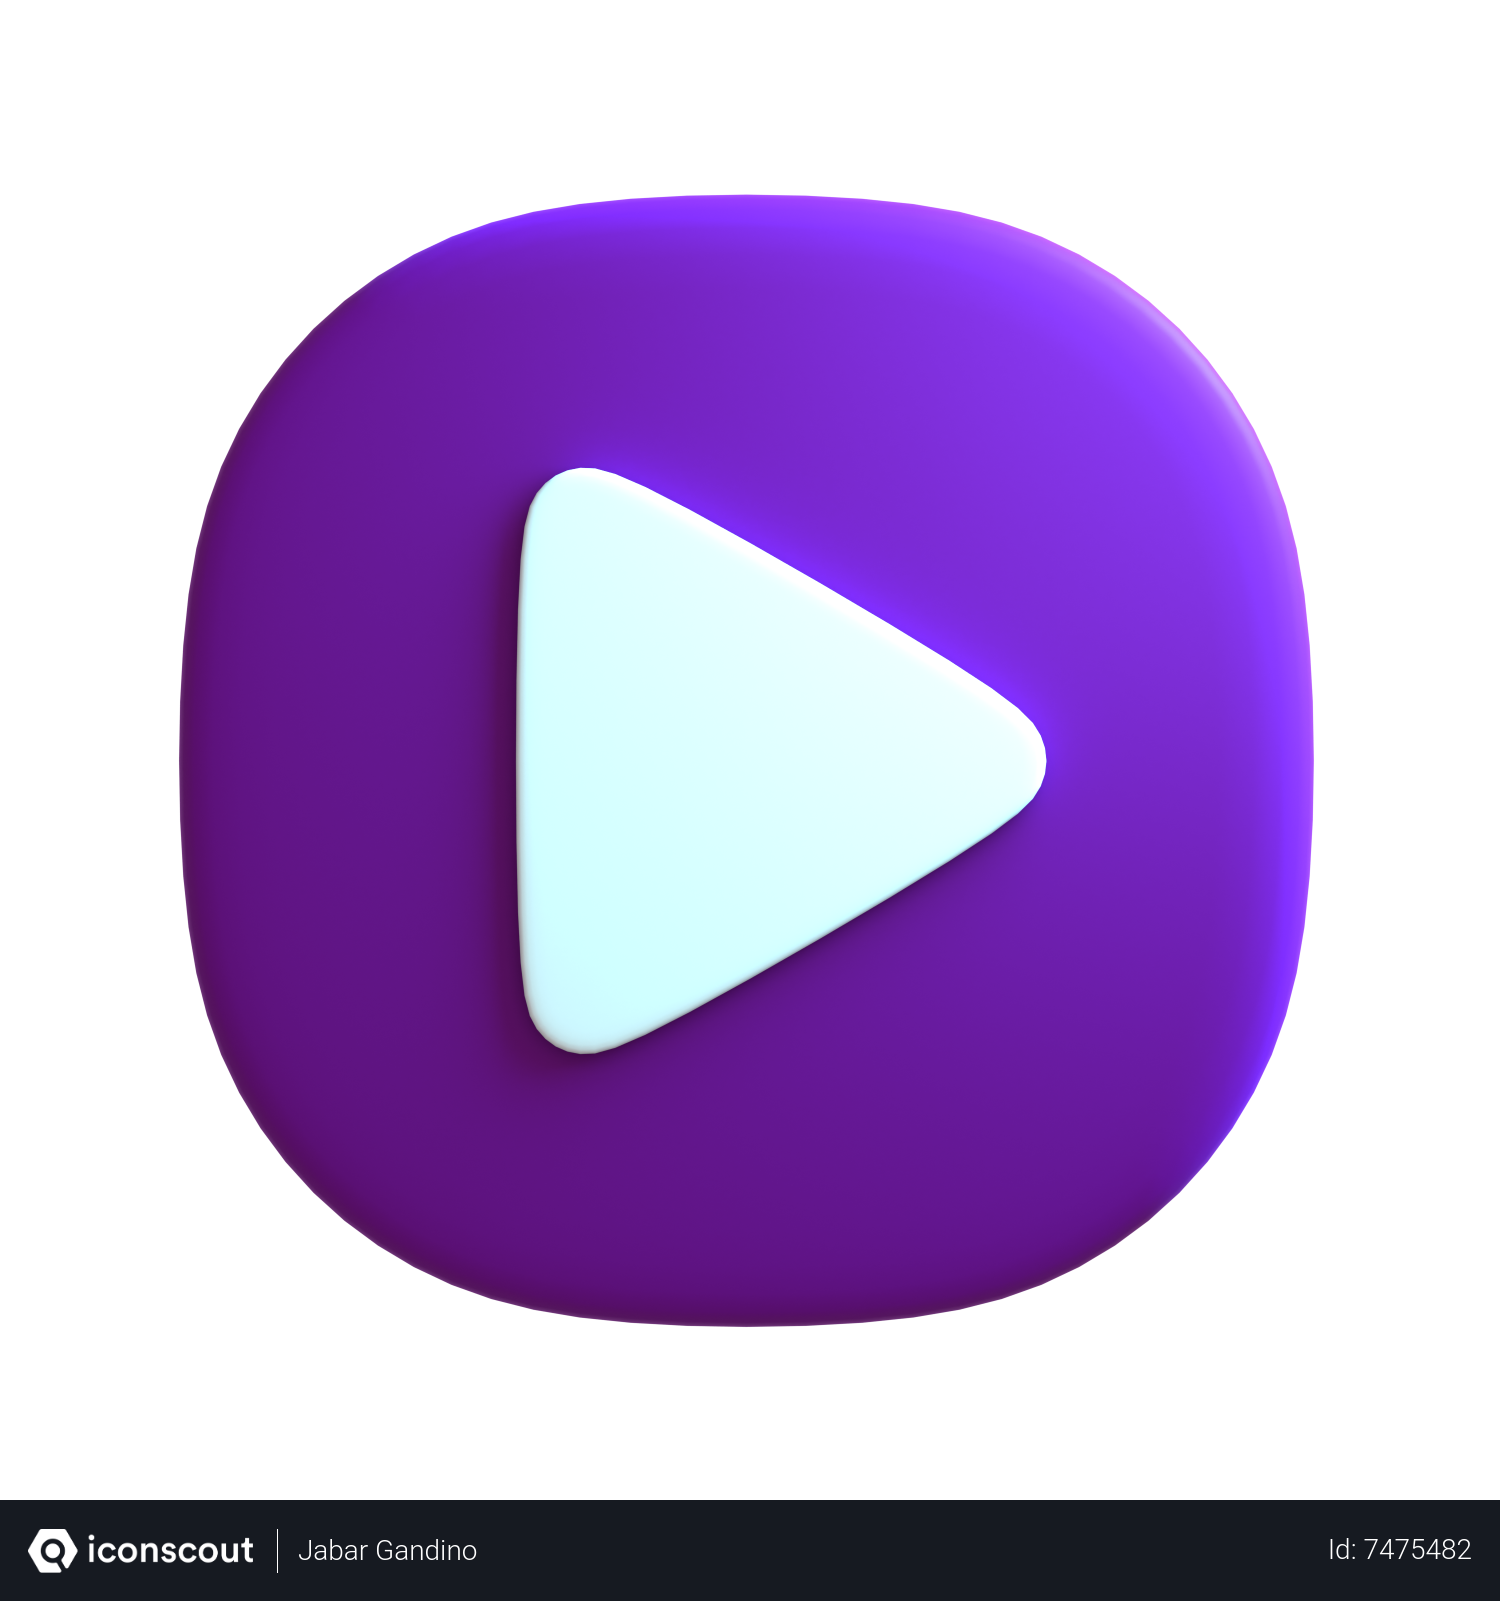 Famous Video Player. YouTube Logo on Screen. Social Media and Video  Sharing. Editorial Stock Photo - Illustration of design, brand: 130899078